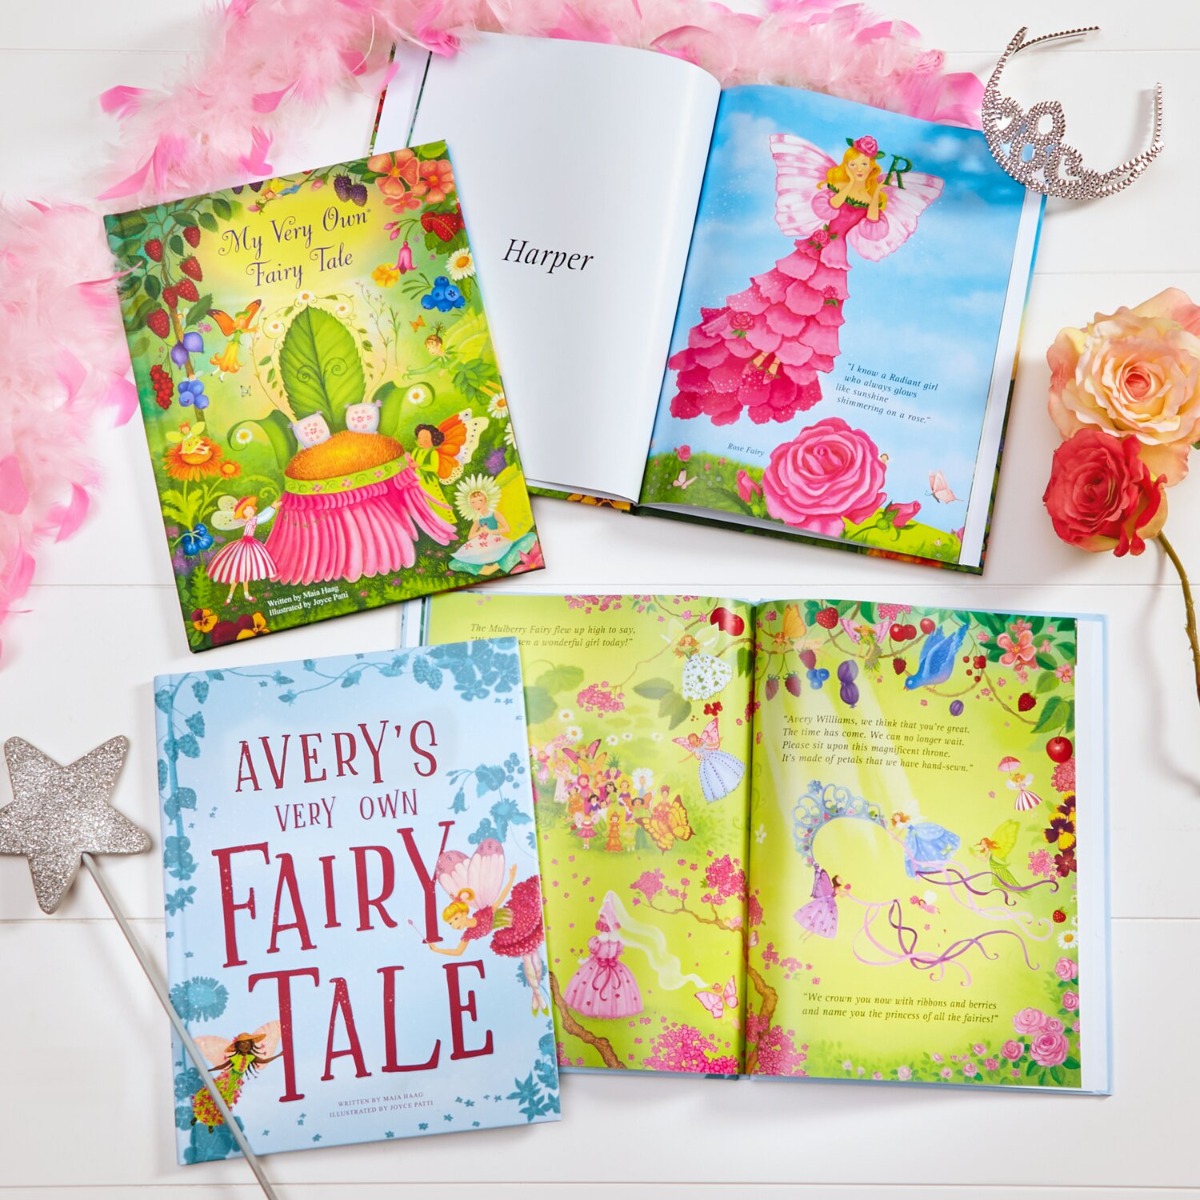  FAlRY TAlL Anime Photo Book: Picture Book Of FAlRY